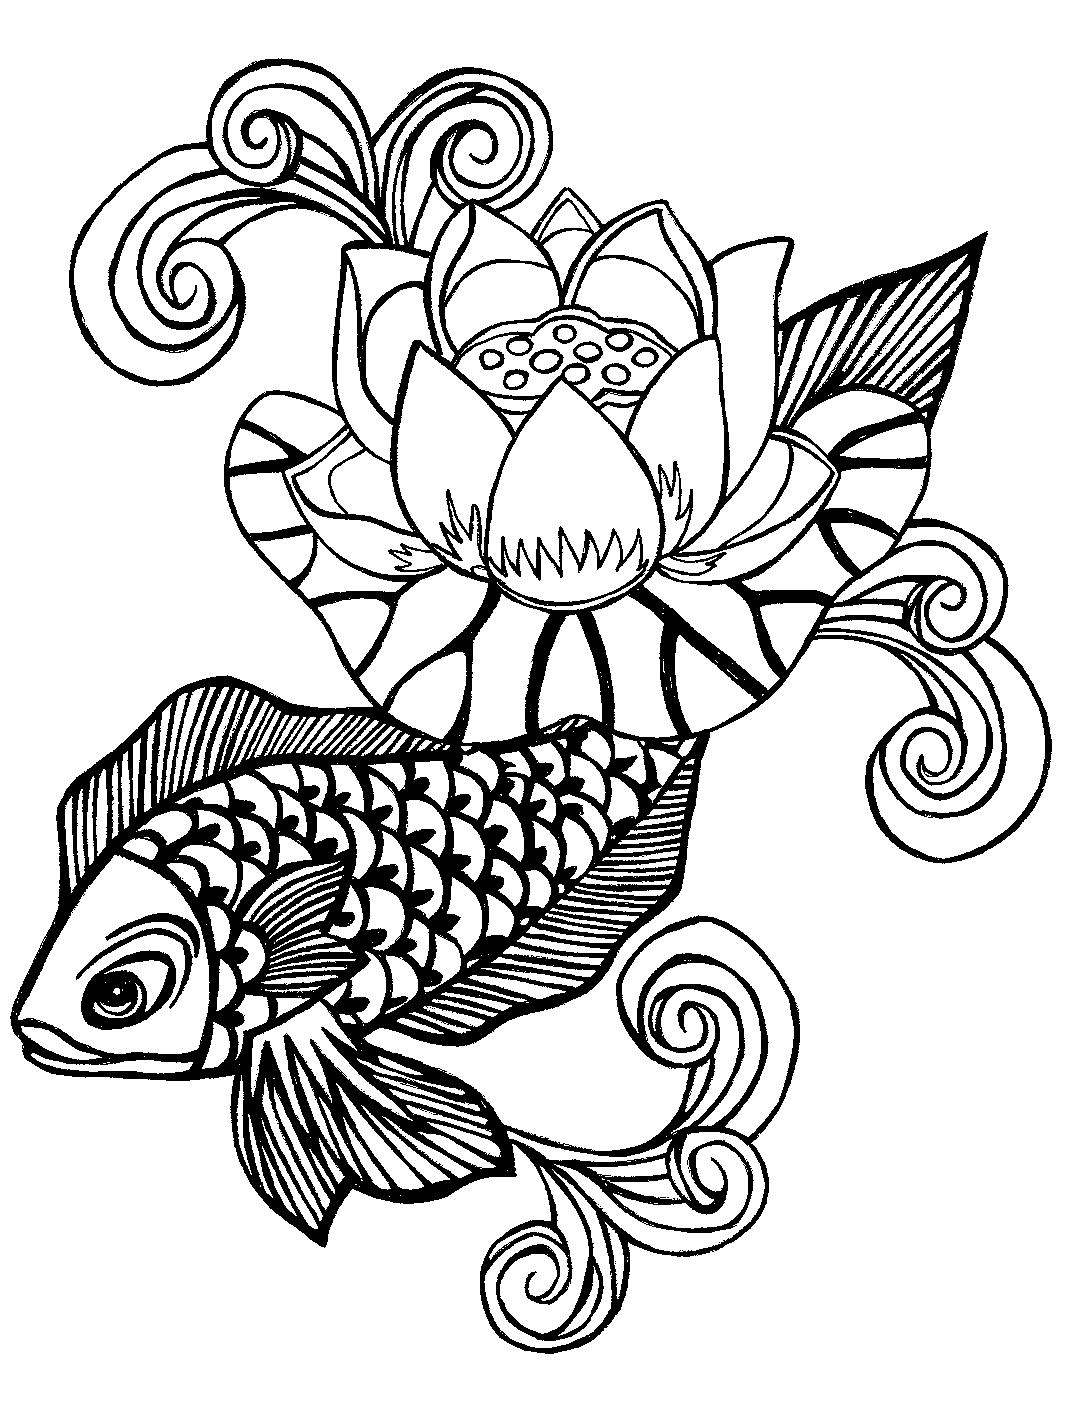 Black And White Pictures Of Tattoos - ClipArt Best